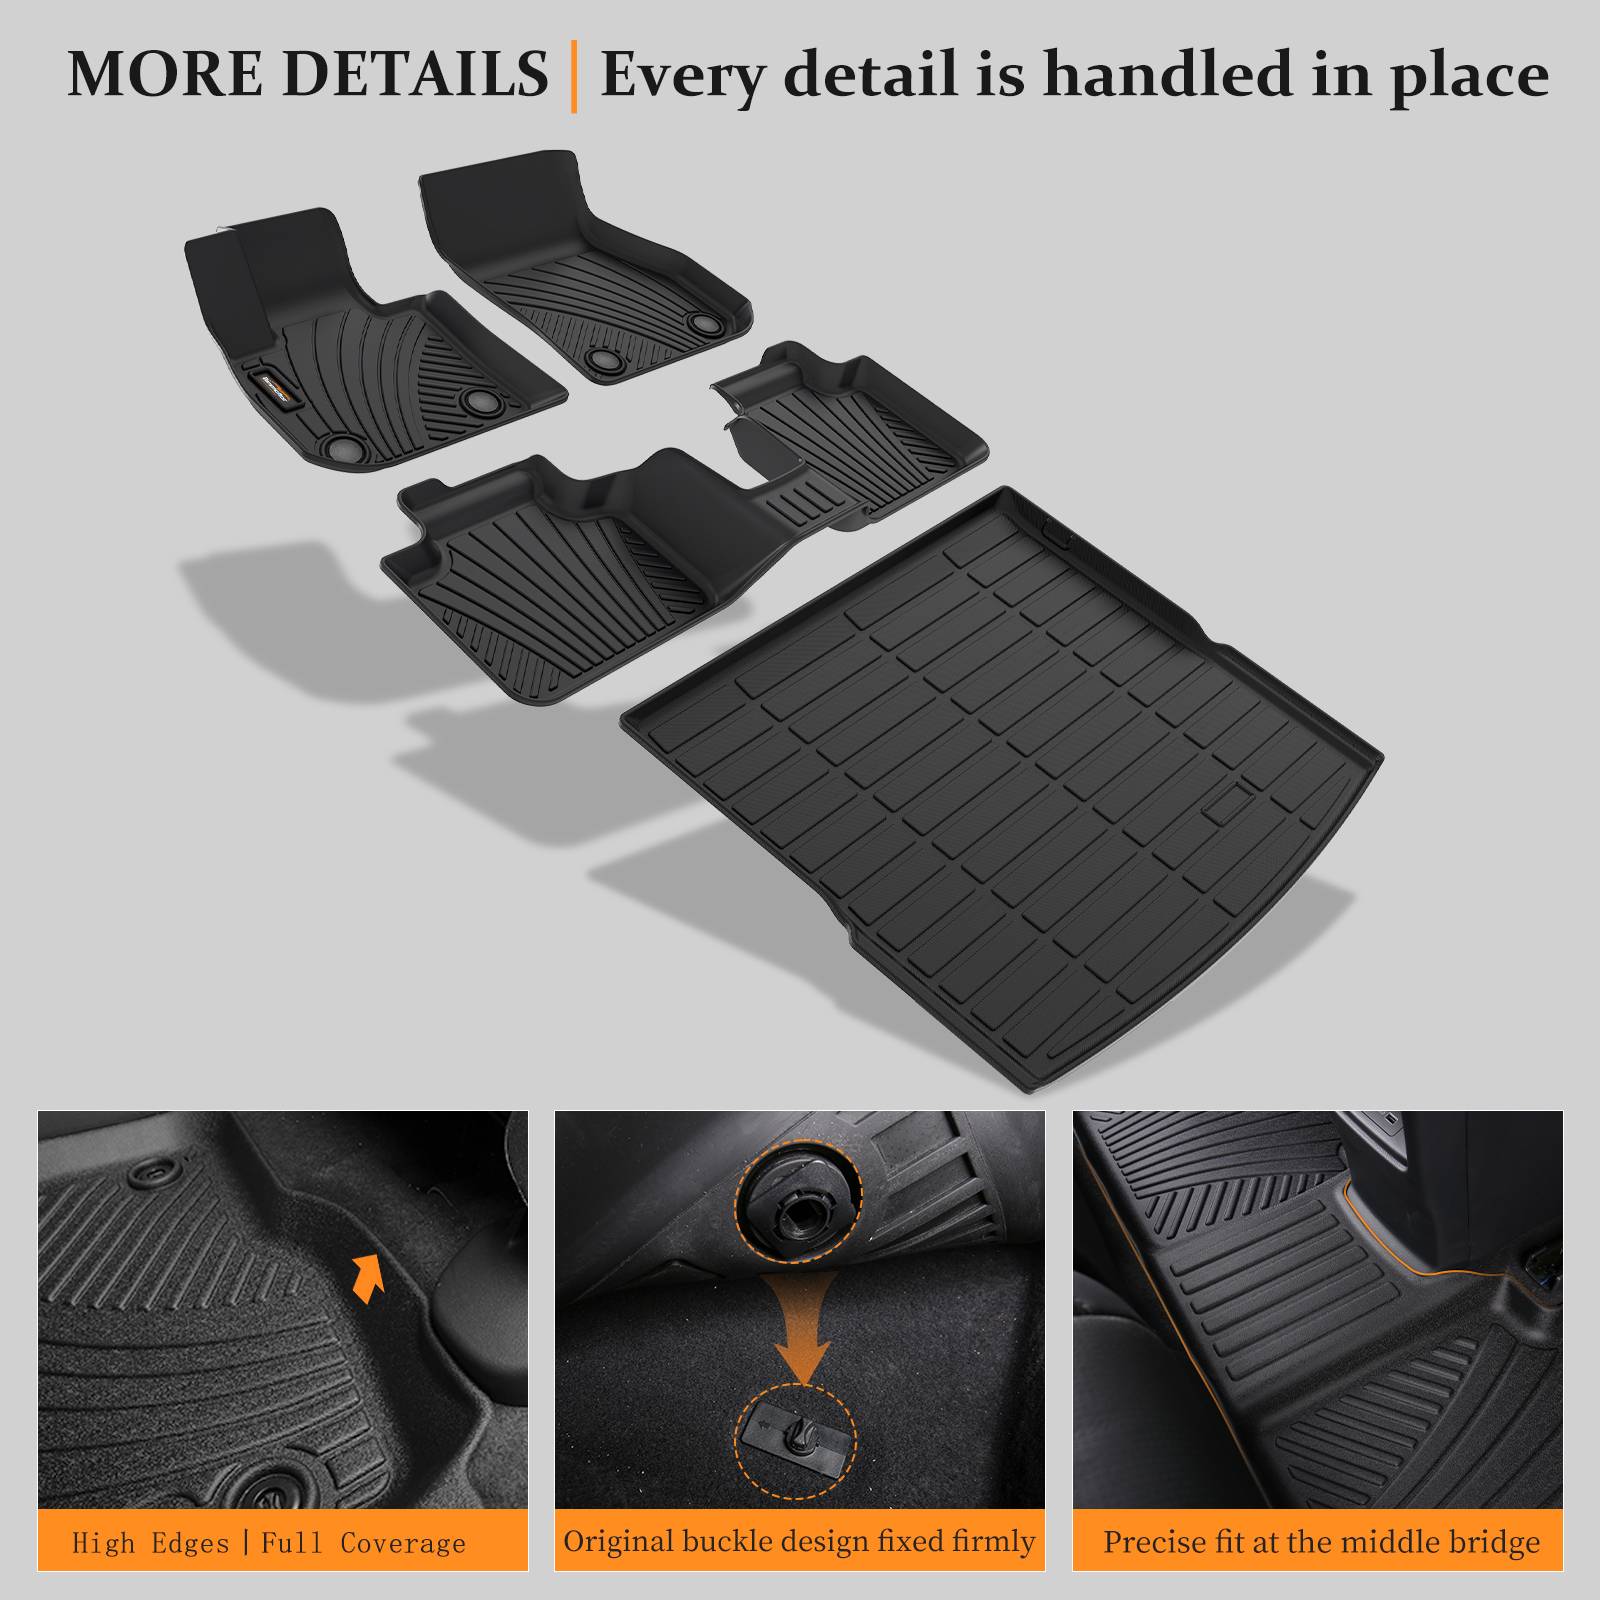 Binmotor-Floor Mats All Weather Floor Mats for Hyundai Ioniq 5 Movable Console (Limited Models), 1st & 2nd Row Full Set, Heavy Duty Car Floor Liners-Black IONIQ5 Accessories（compatible year 2022-2024）